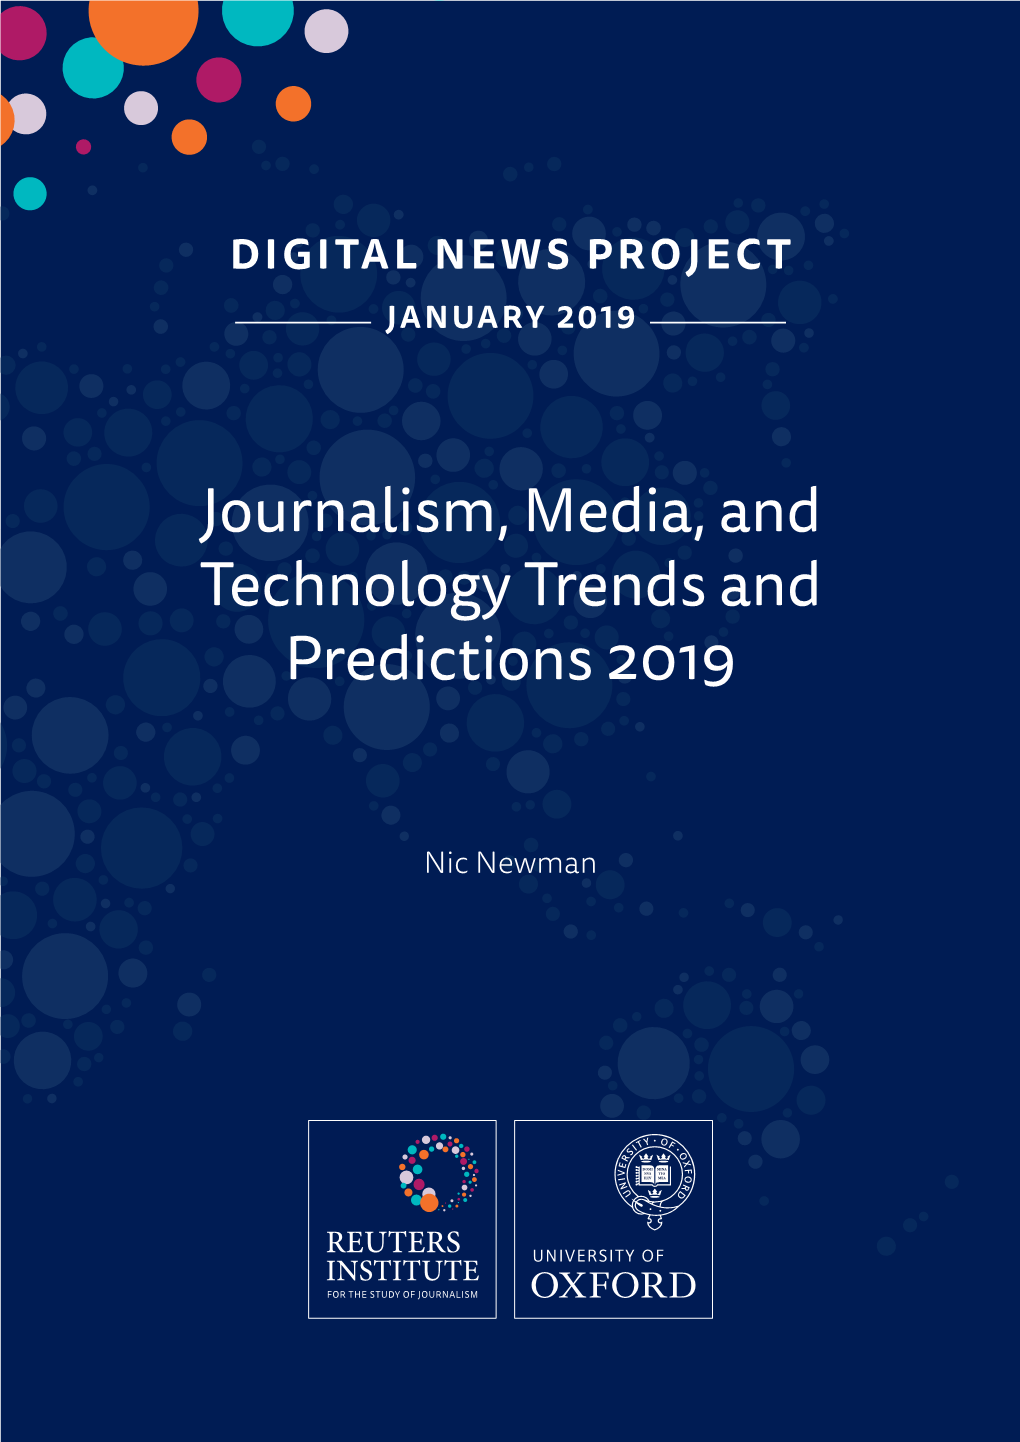 Journalism, Media, and Technology Trends and Predictions 2019